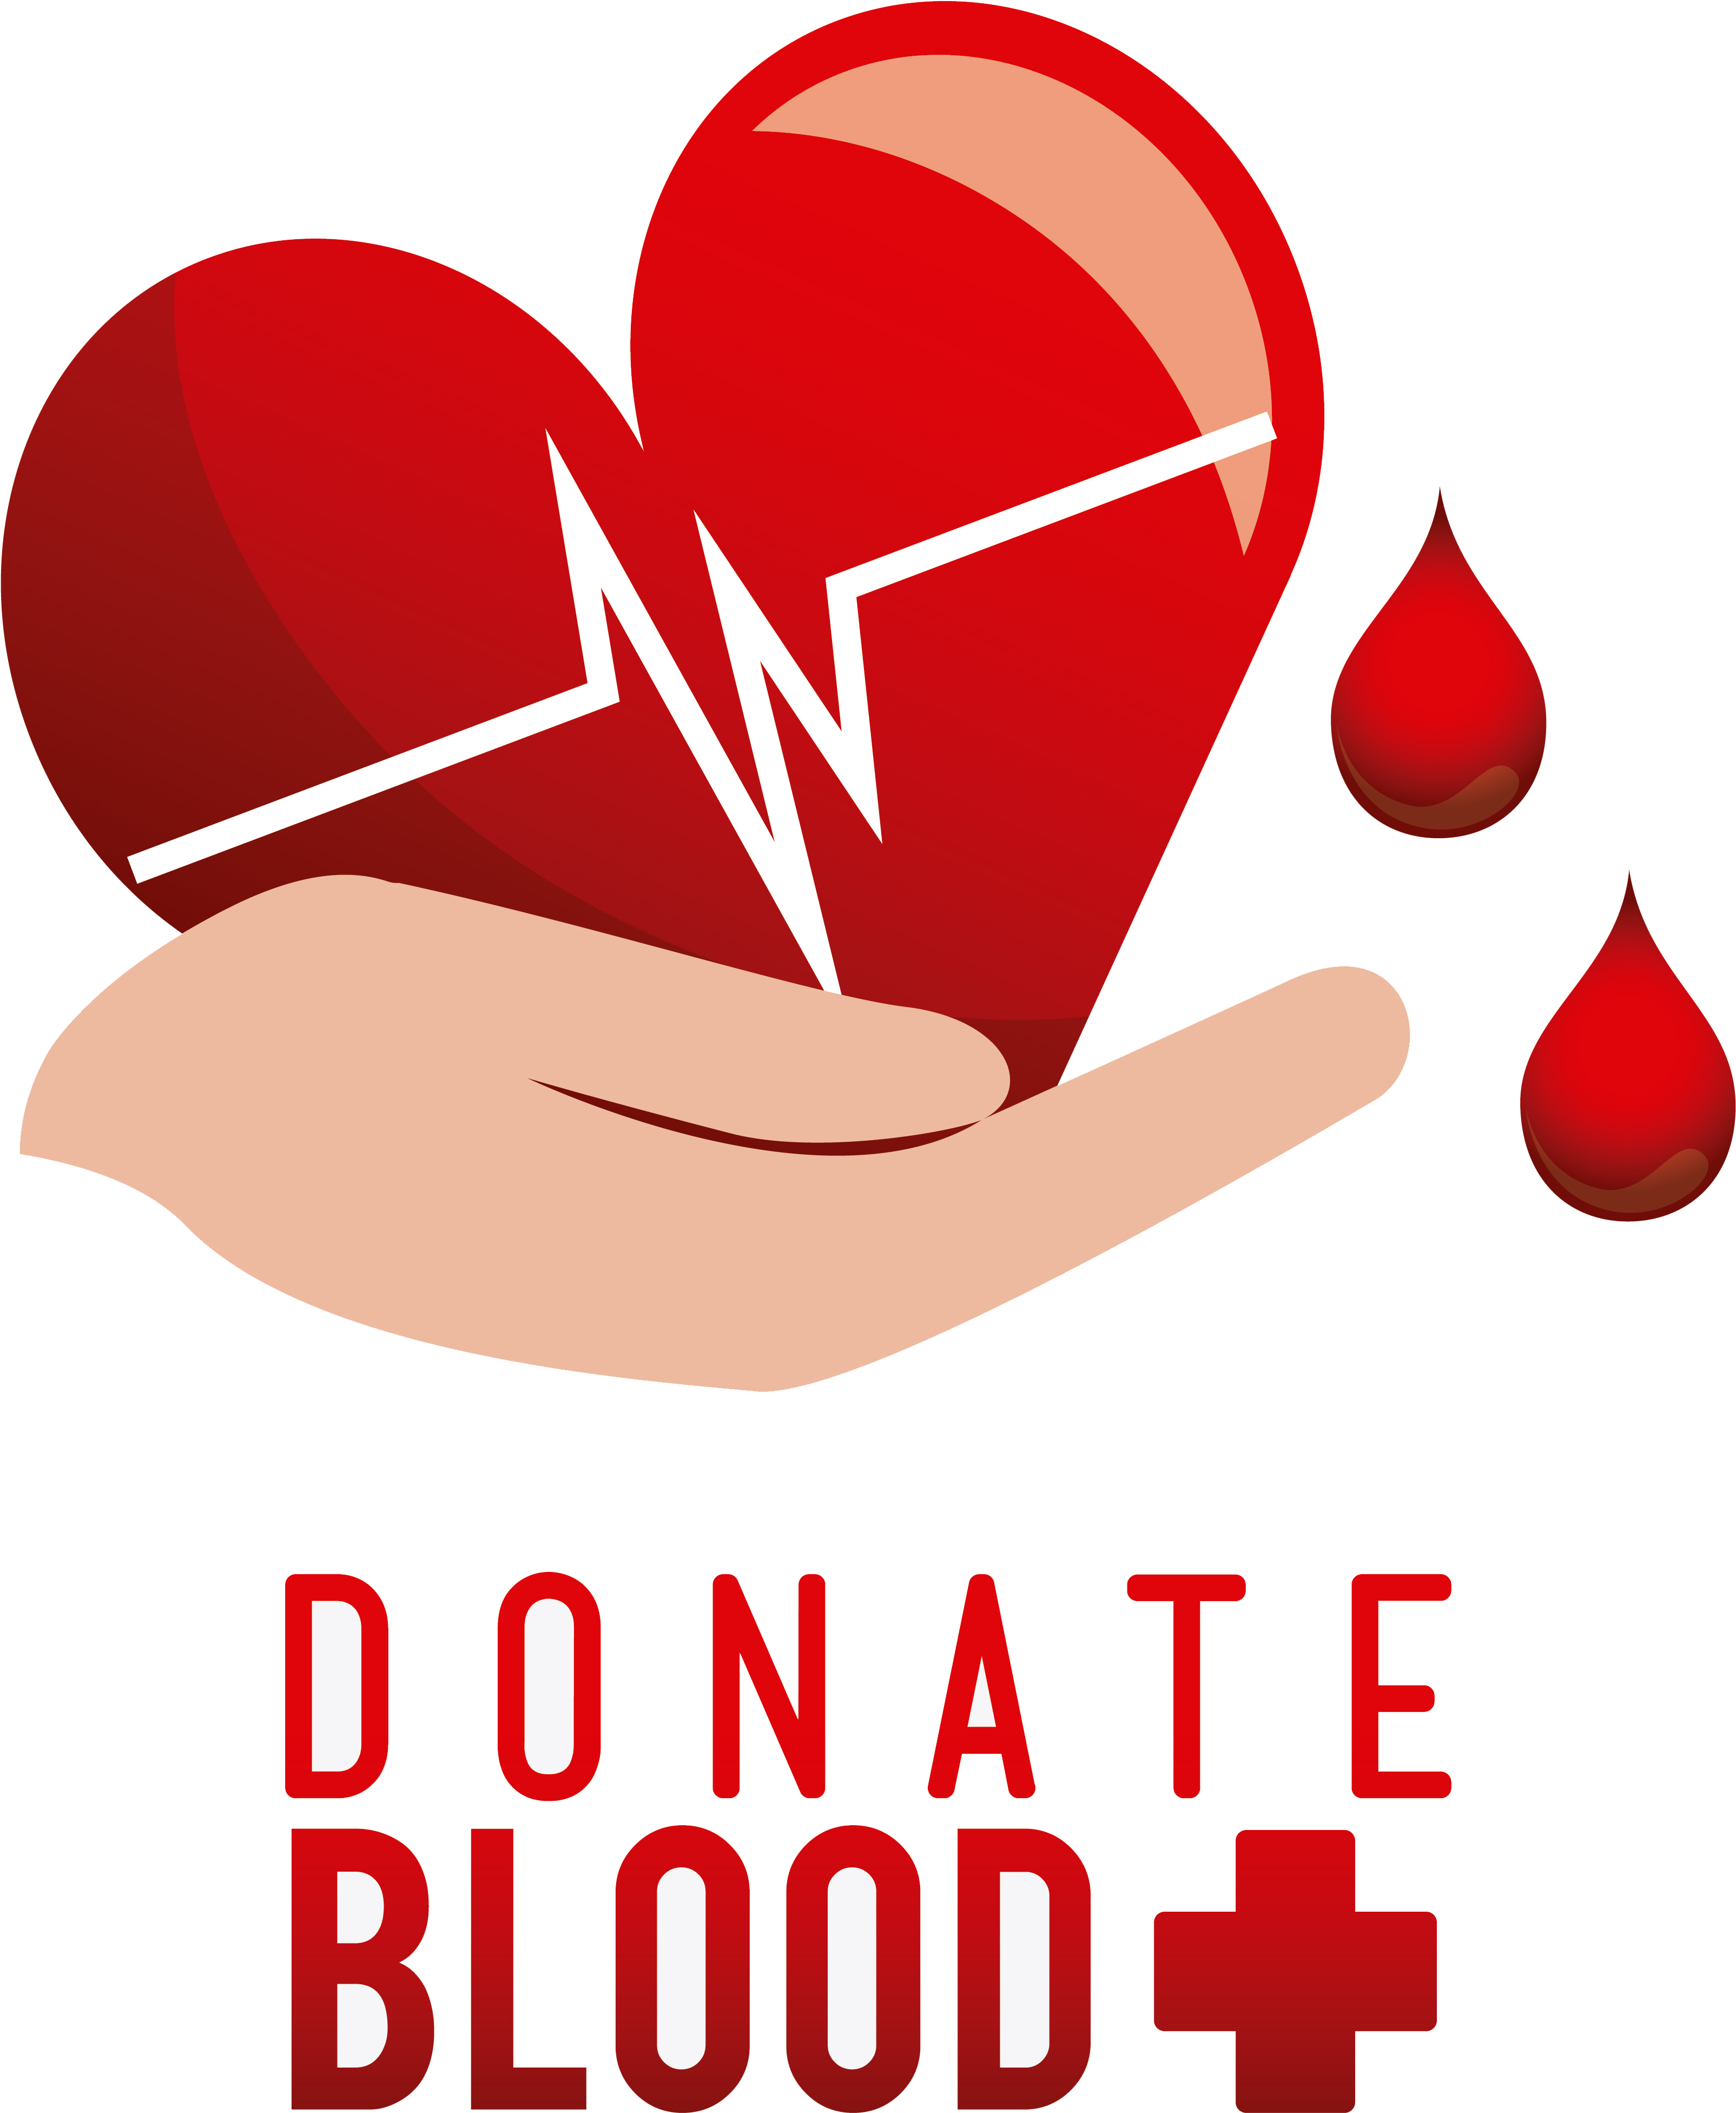 Blood Donation Fo Guang Shan - Blood Donation Png (4860x5315)